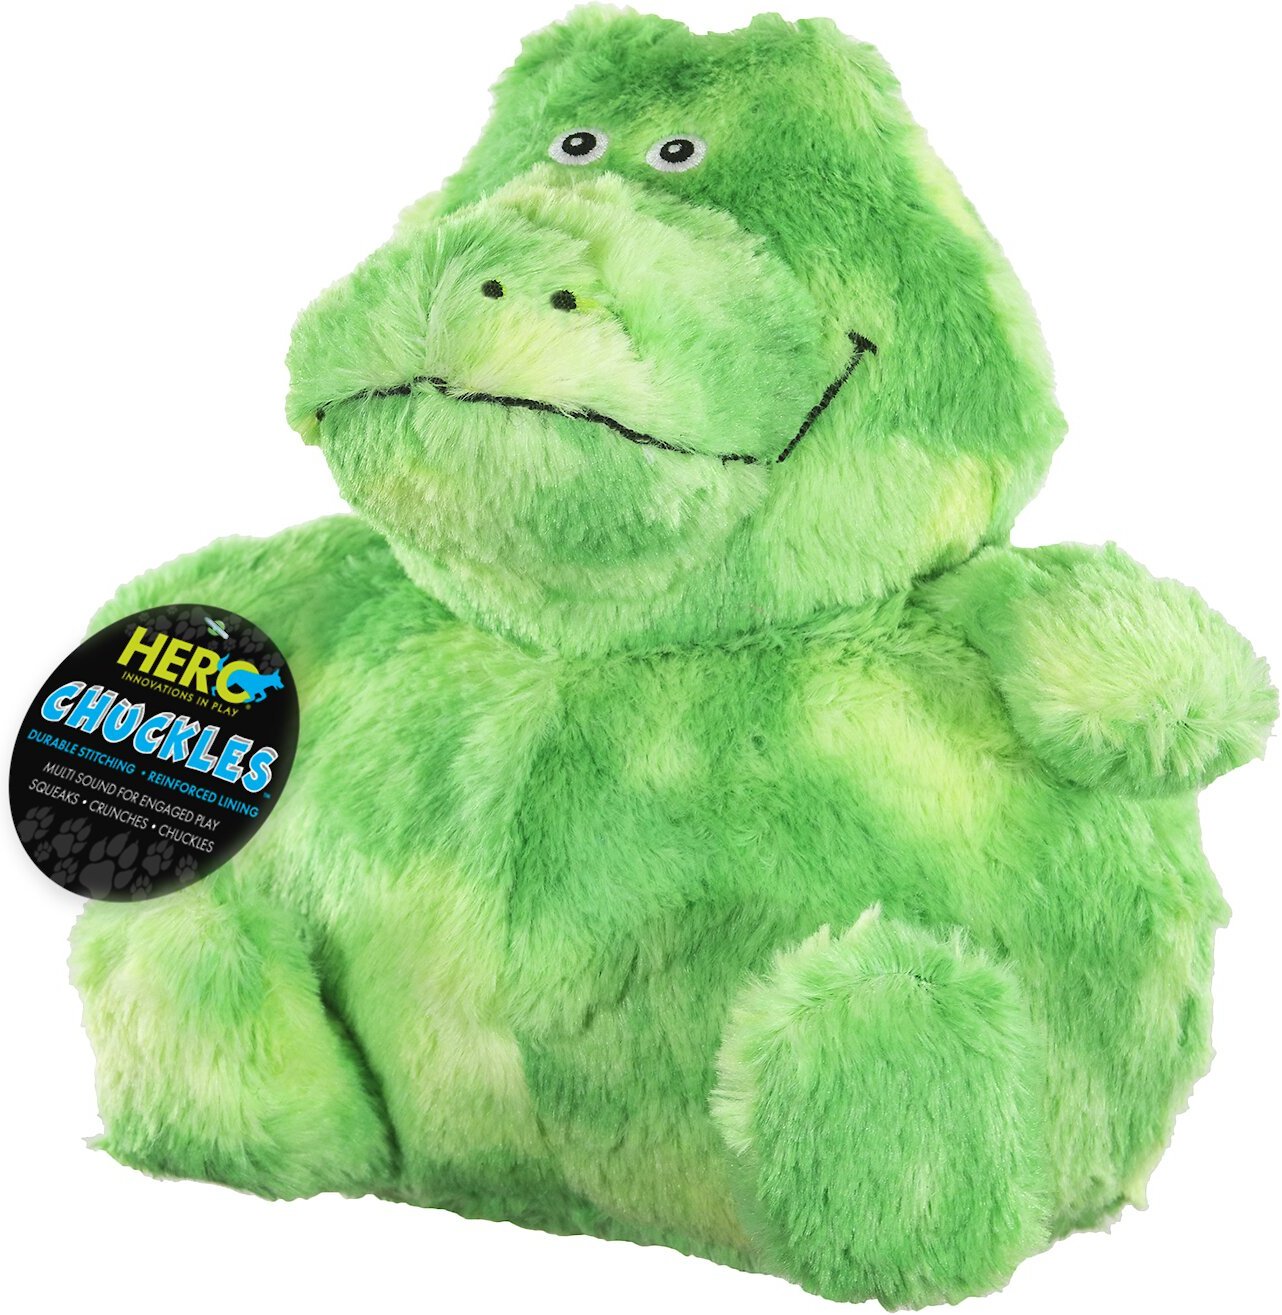 Durable Stuffed Animal with 3-in-1 Squeaker Hero Chuckles Frog Plush Dog Toy